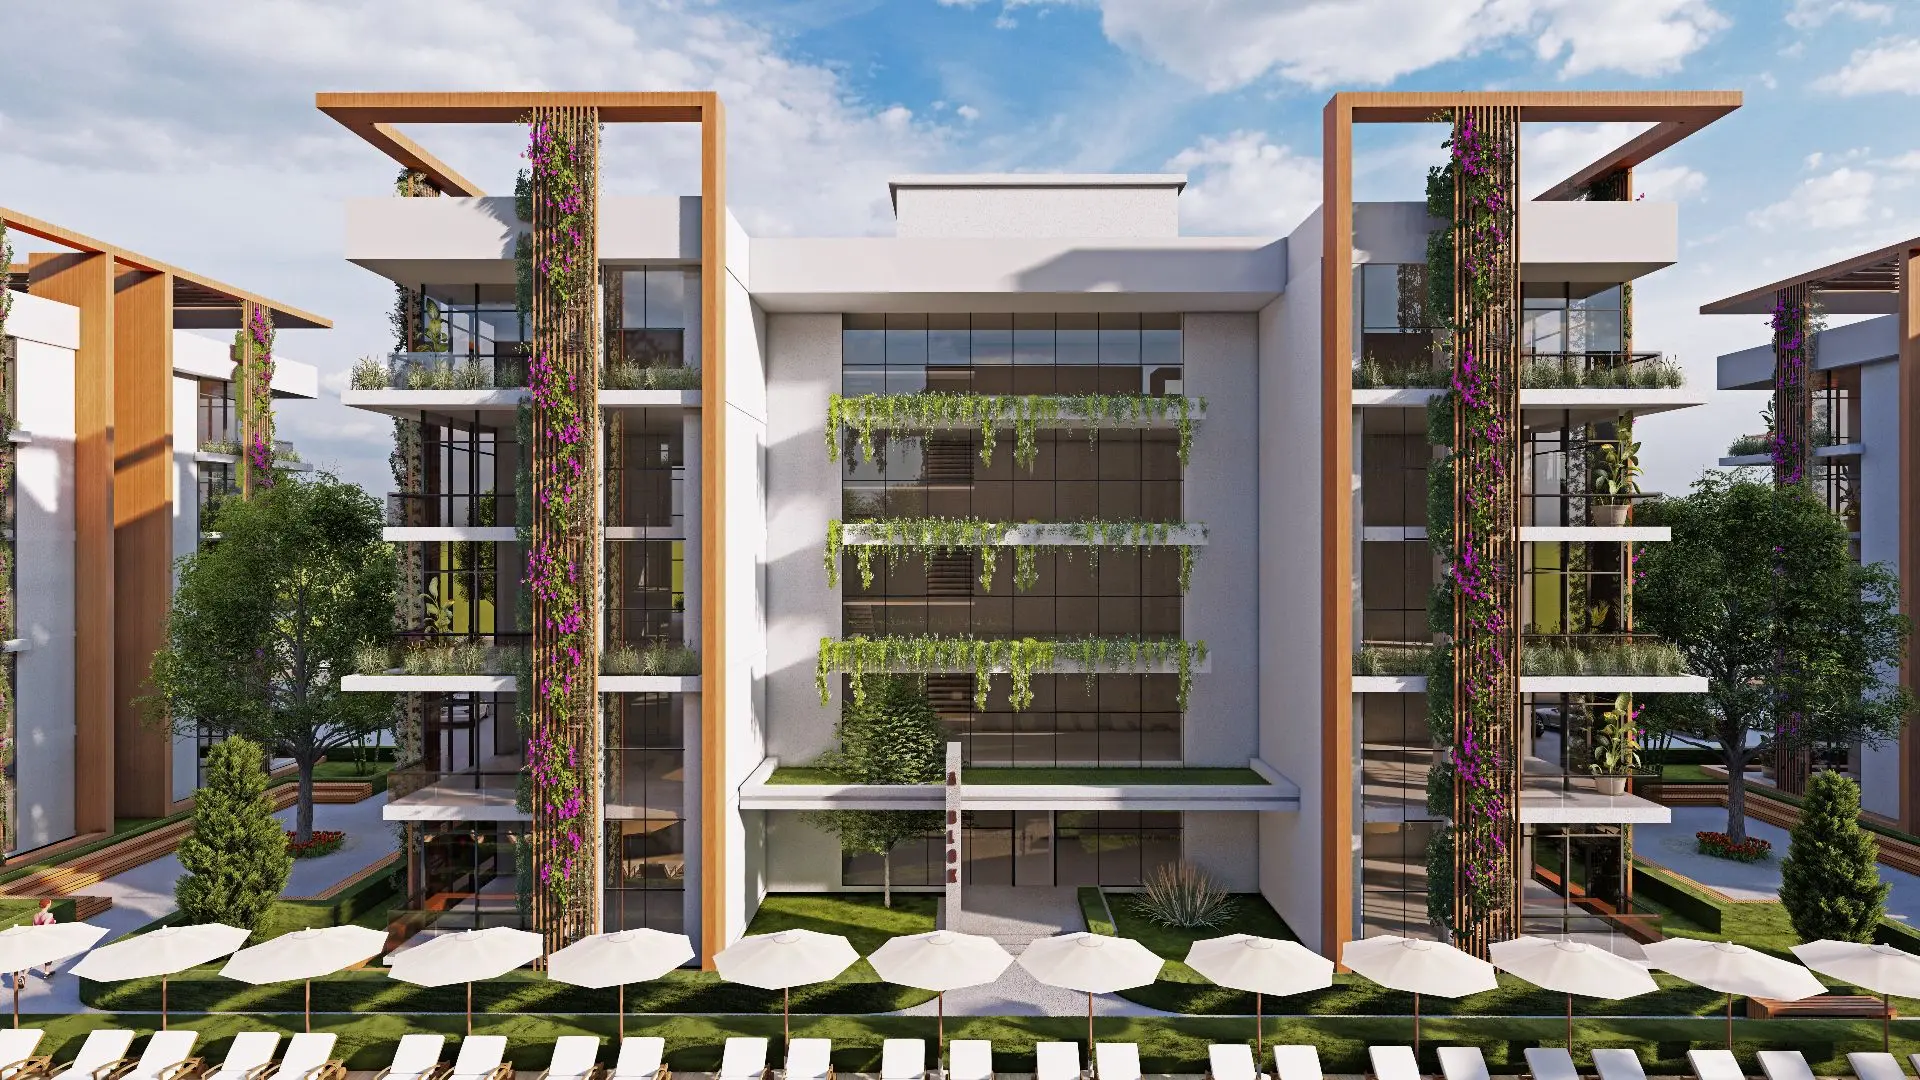 LARGE COMPLEX PROJECT CLOSE TO THE AIRPORT IN ANTALYA